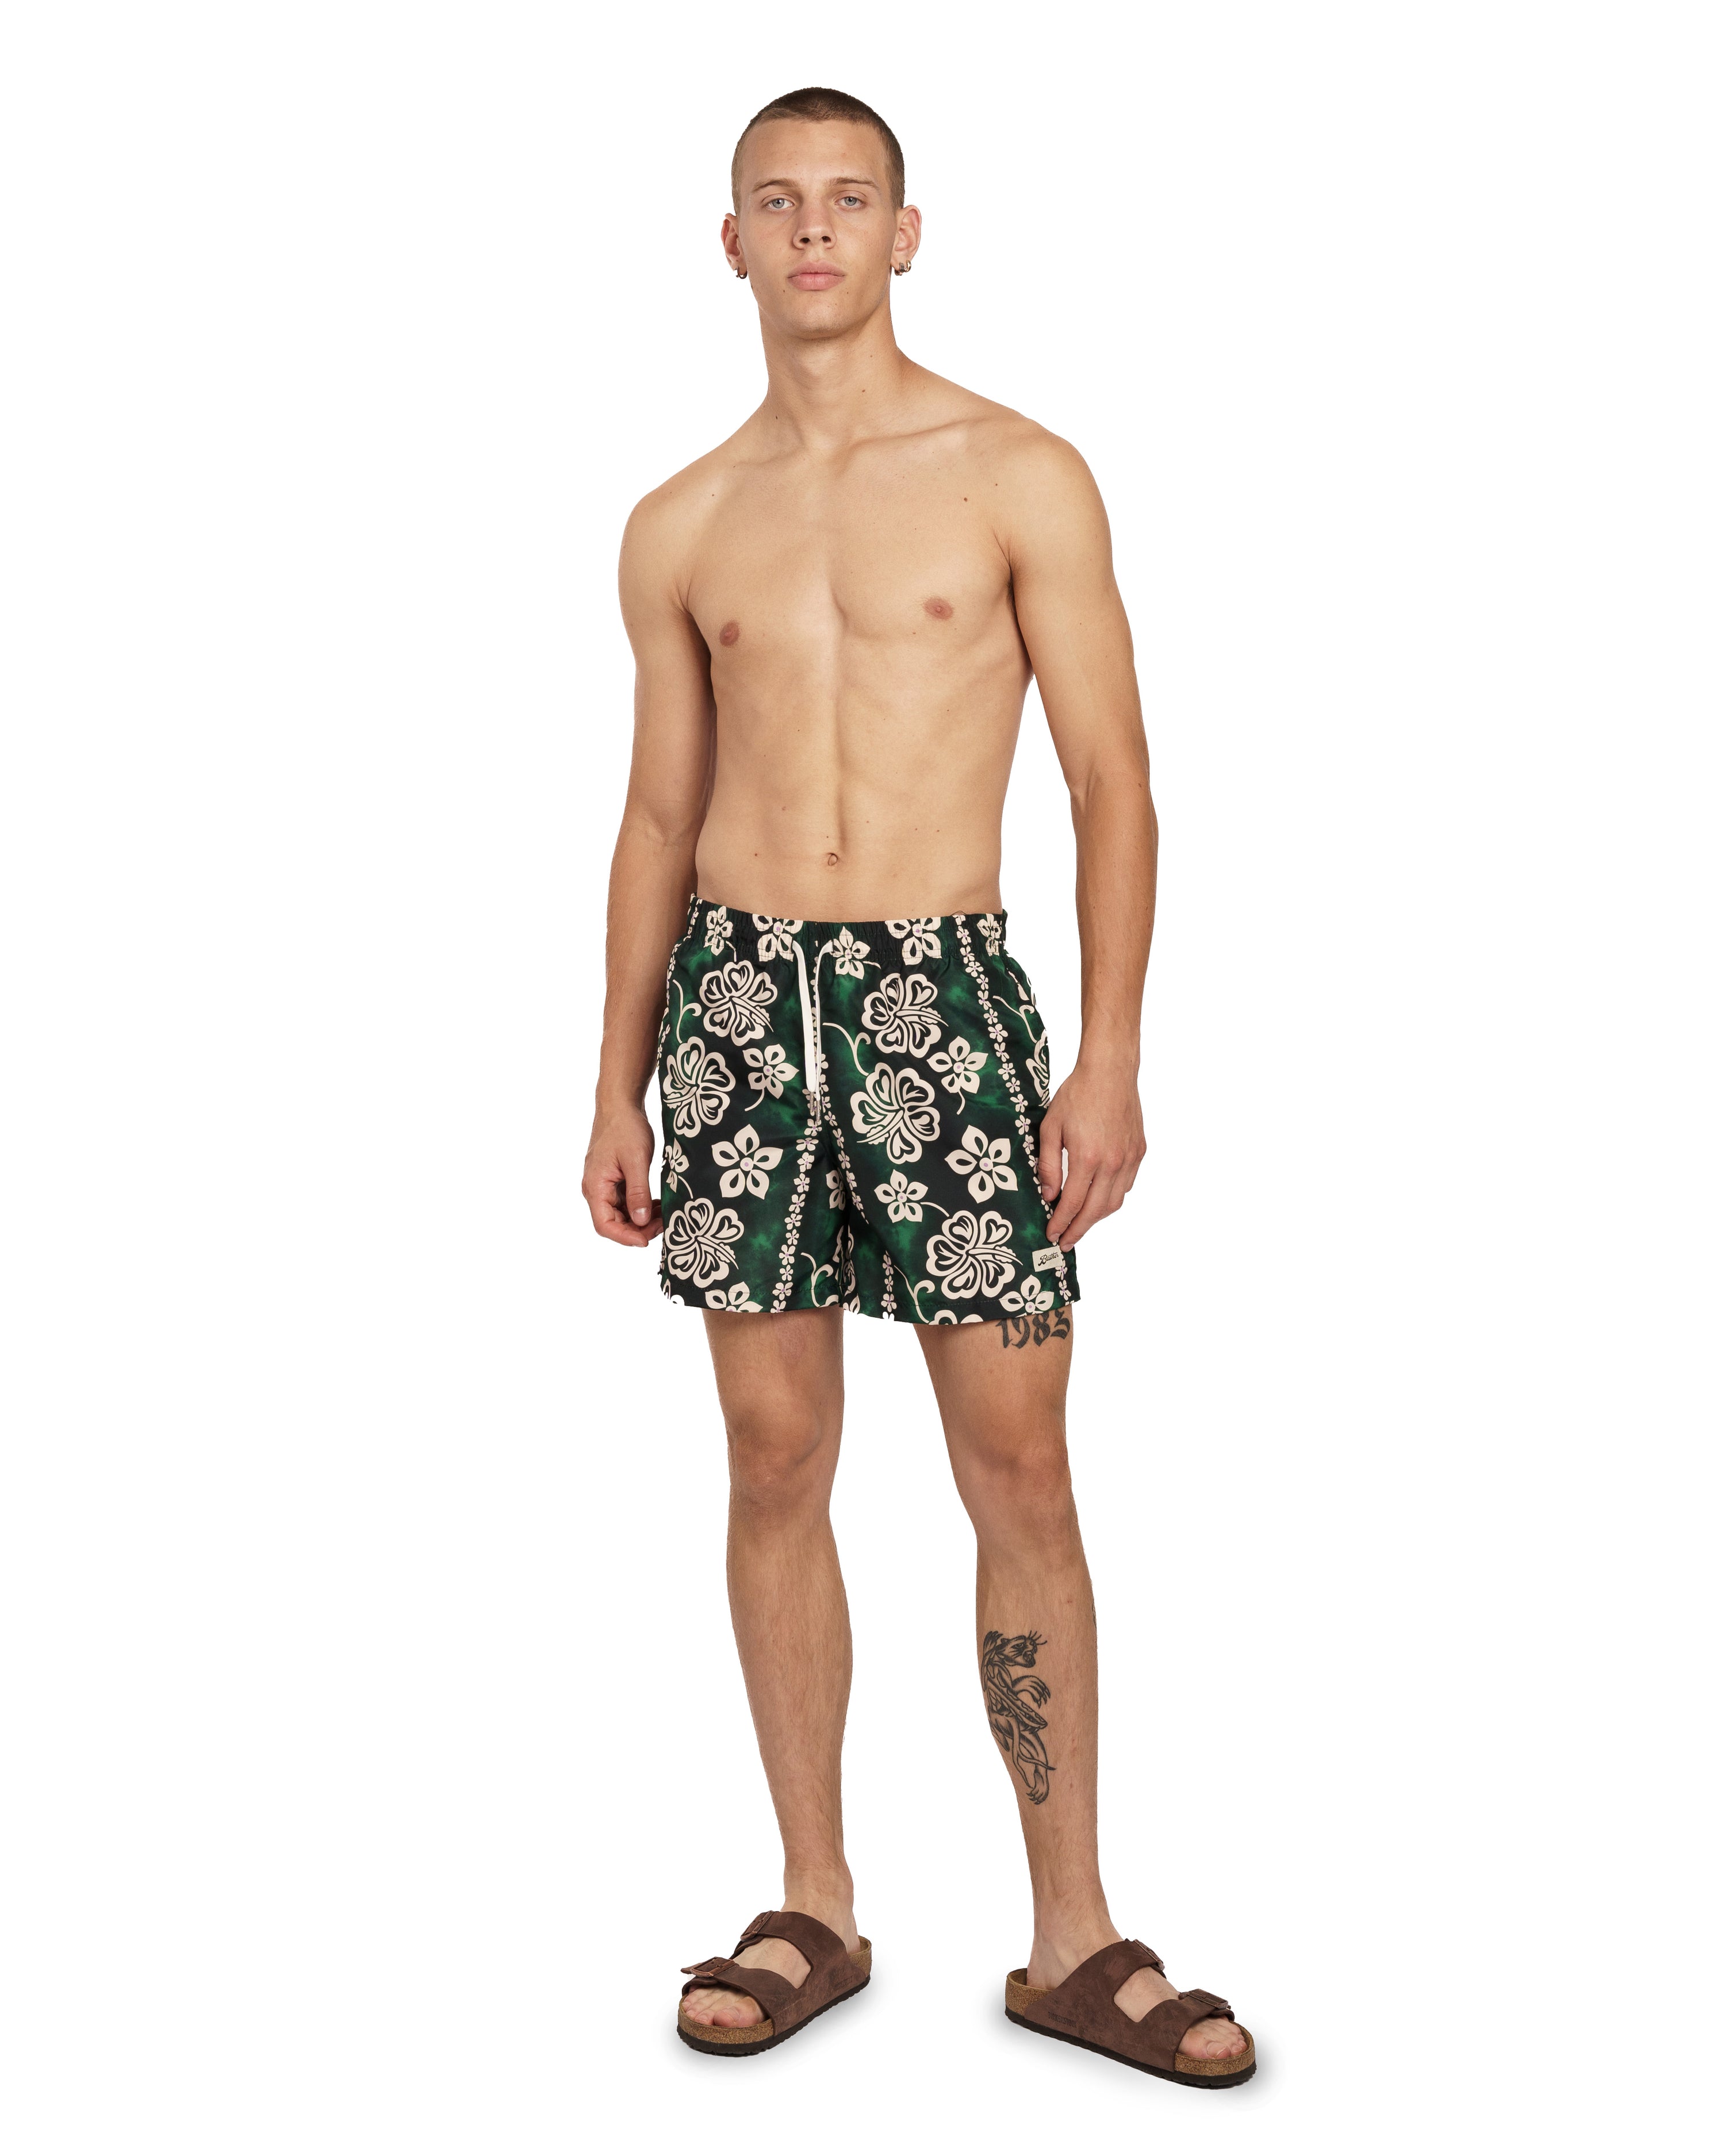 Model wearing Green Bather swim trunk with a tropical pattern and beige floral motif